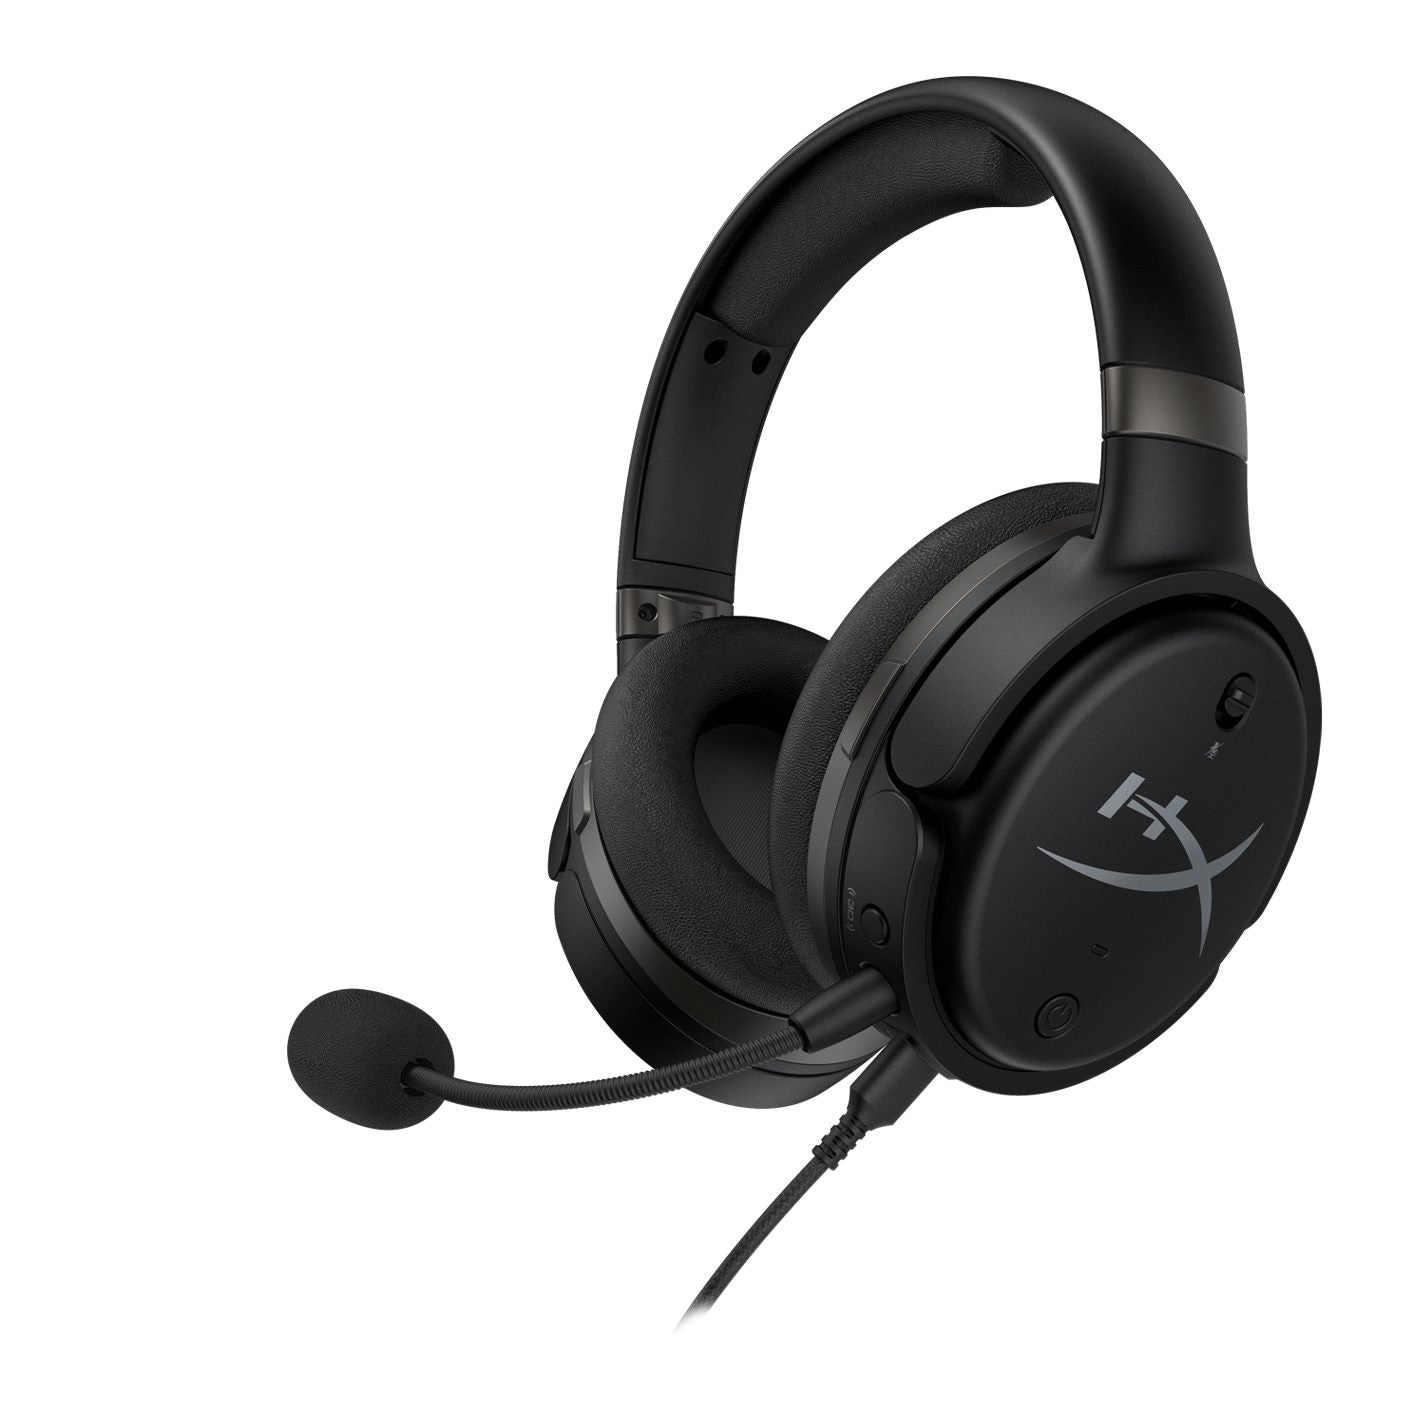 HyperX Cloud Orbit S gaming headset displaying the front left hand side featuring the detachable noise cancelling microphone